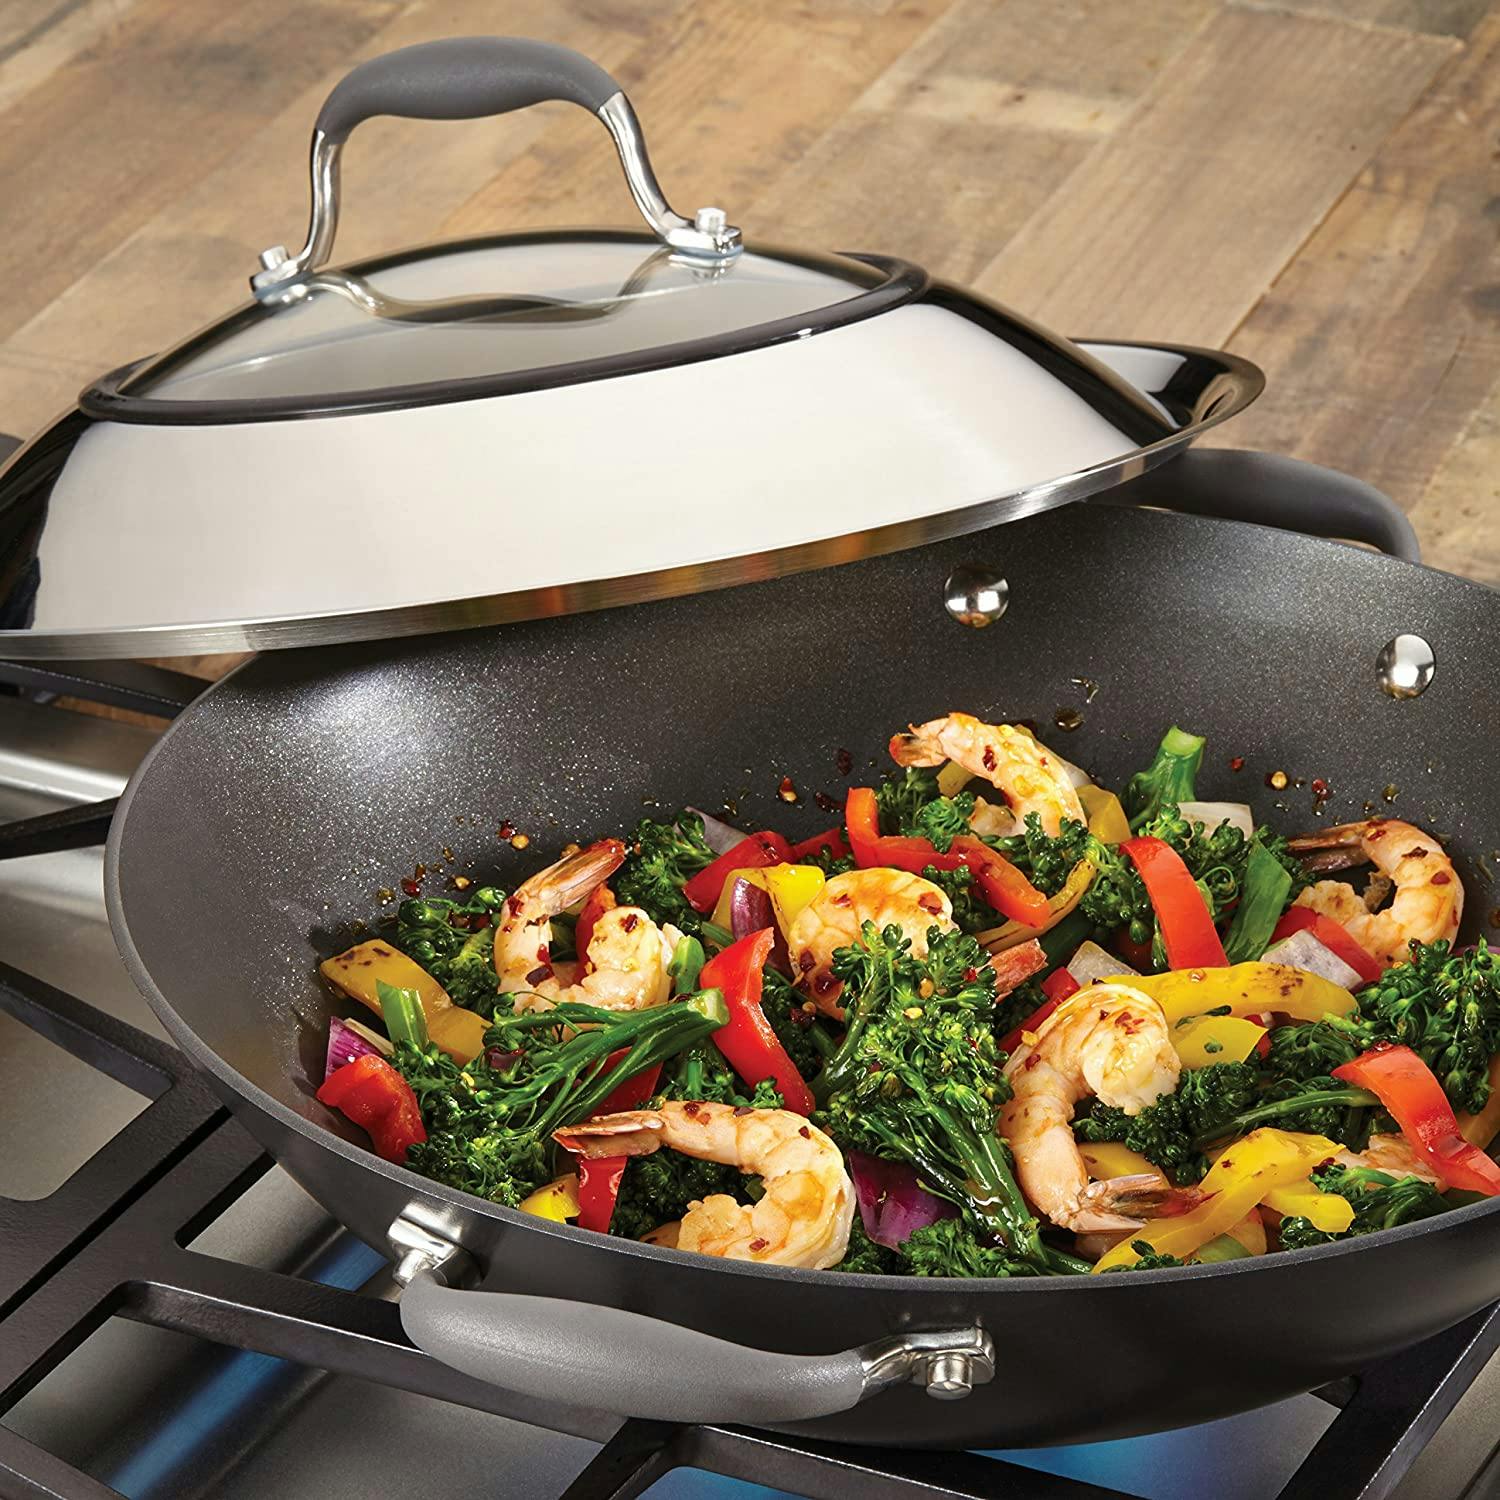 Anolon Advanced Home Hard-Anodized Nonstick Wok with Side Handles and Lid, 14-Inch, Moonstone